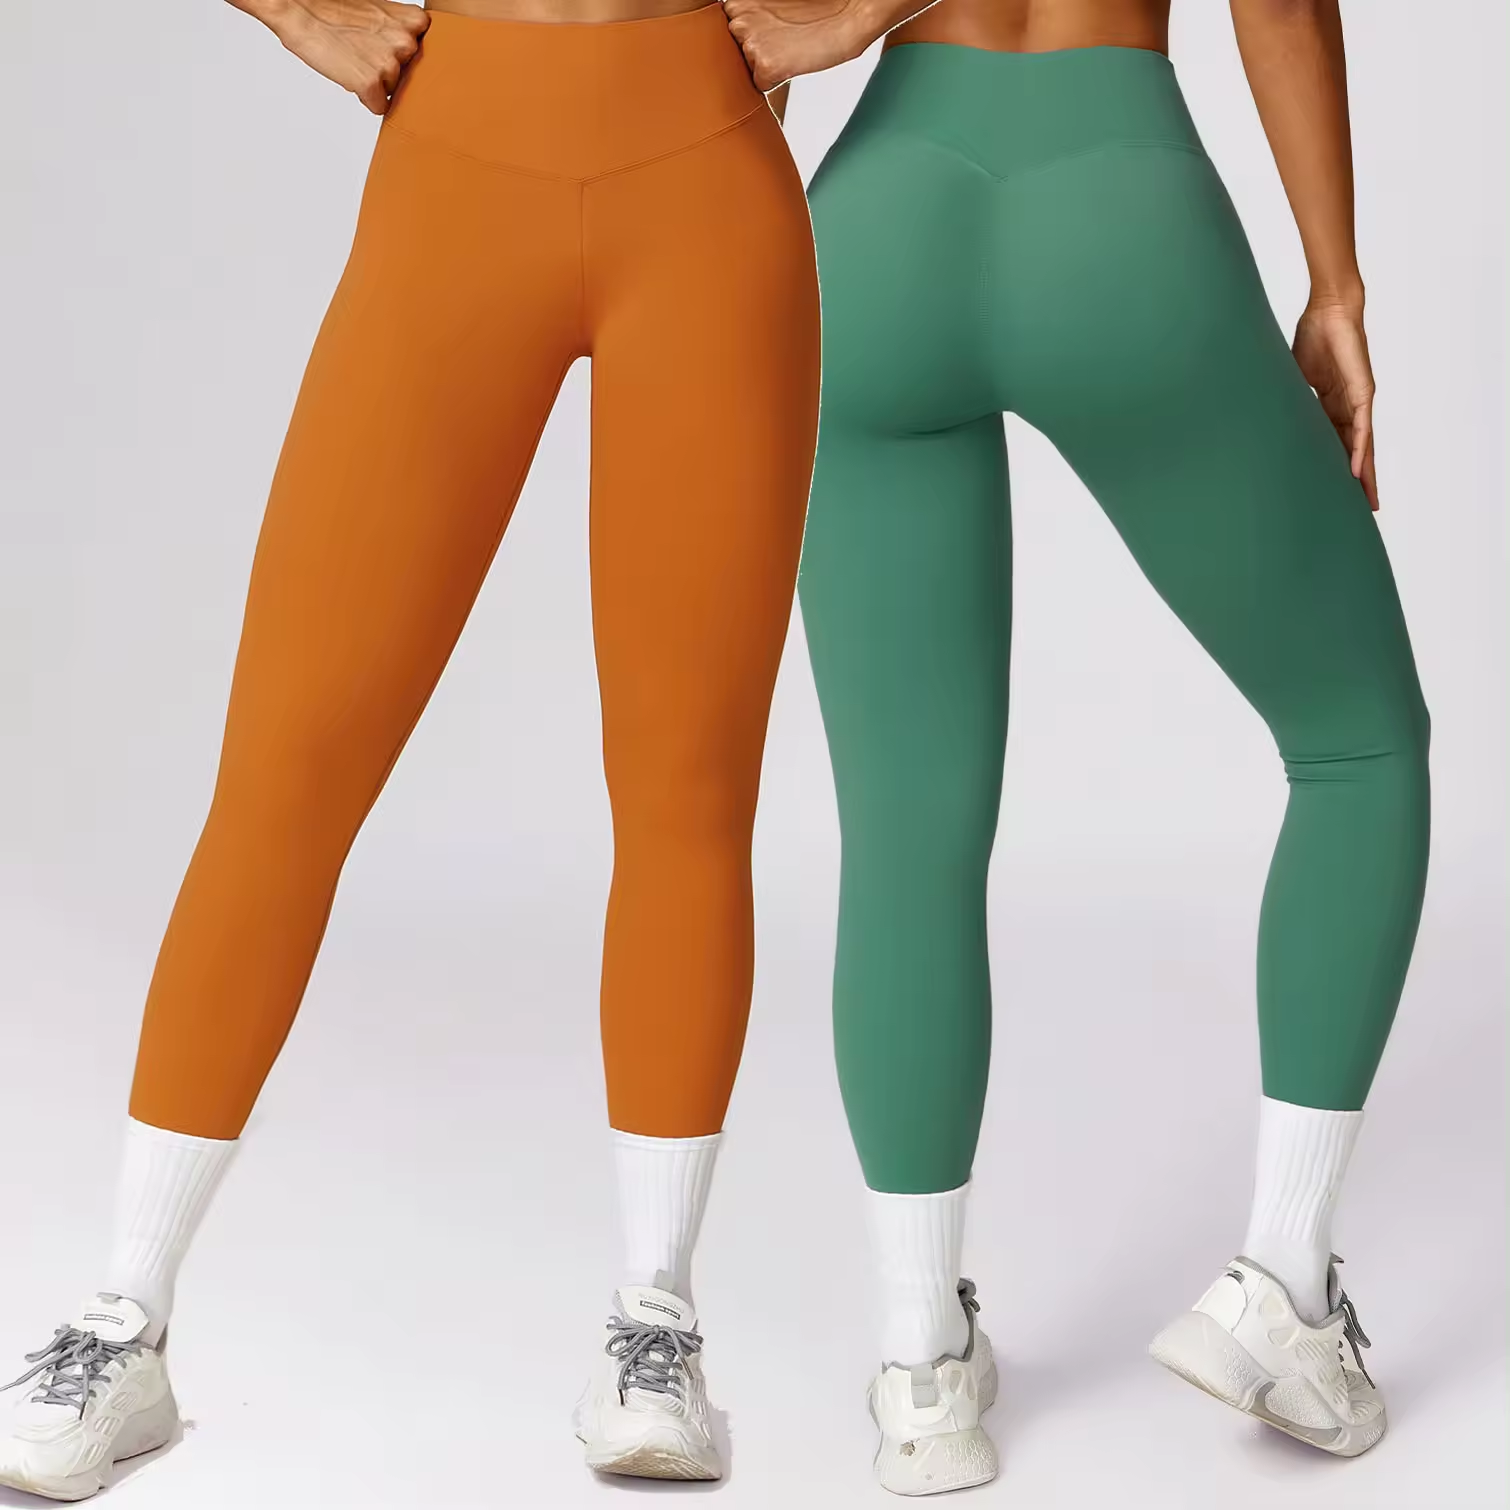 Fashionable High-waisted Quick-drying Fitness Leggings